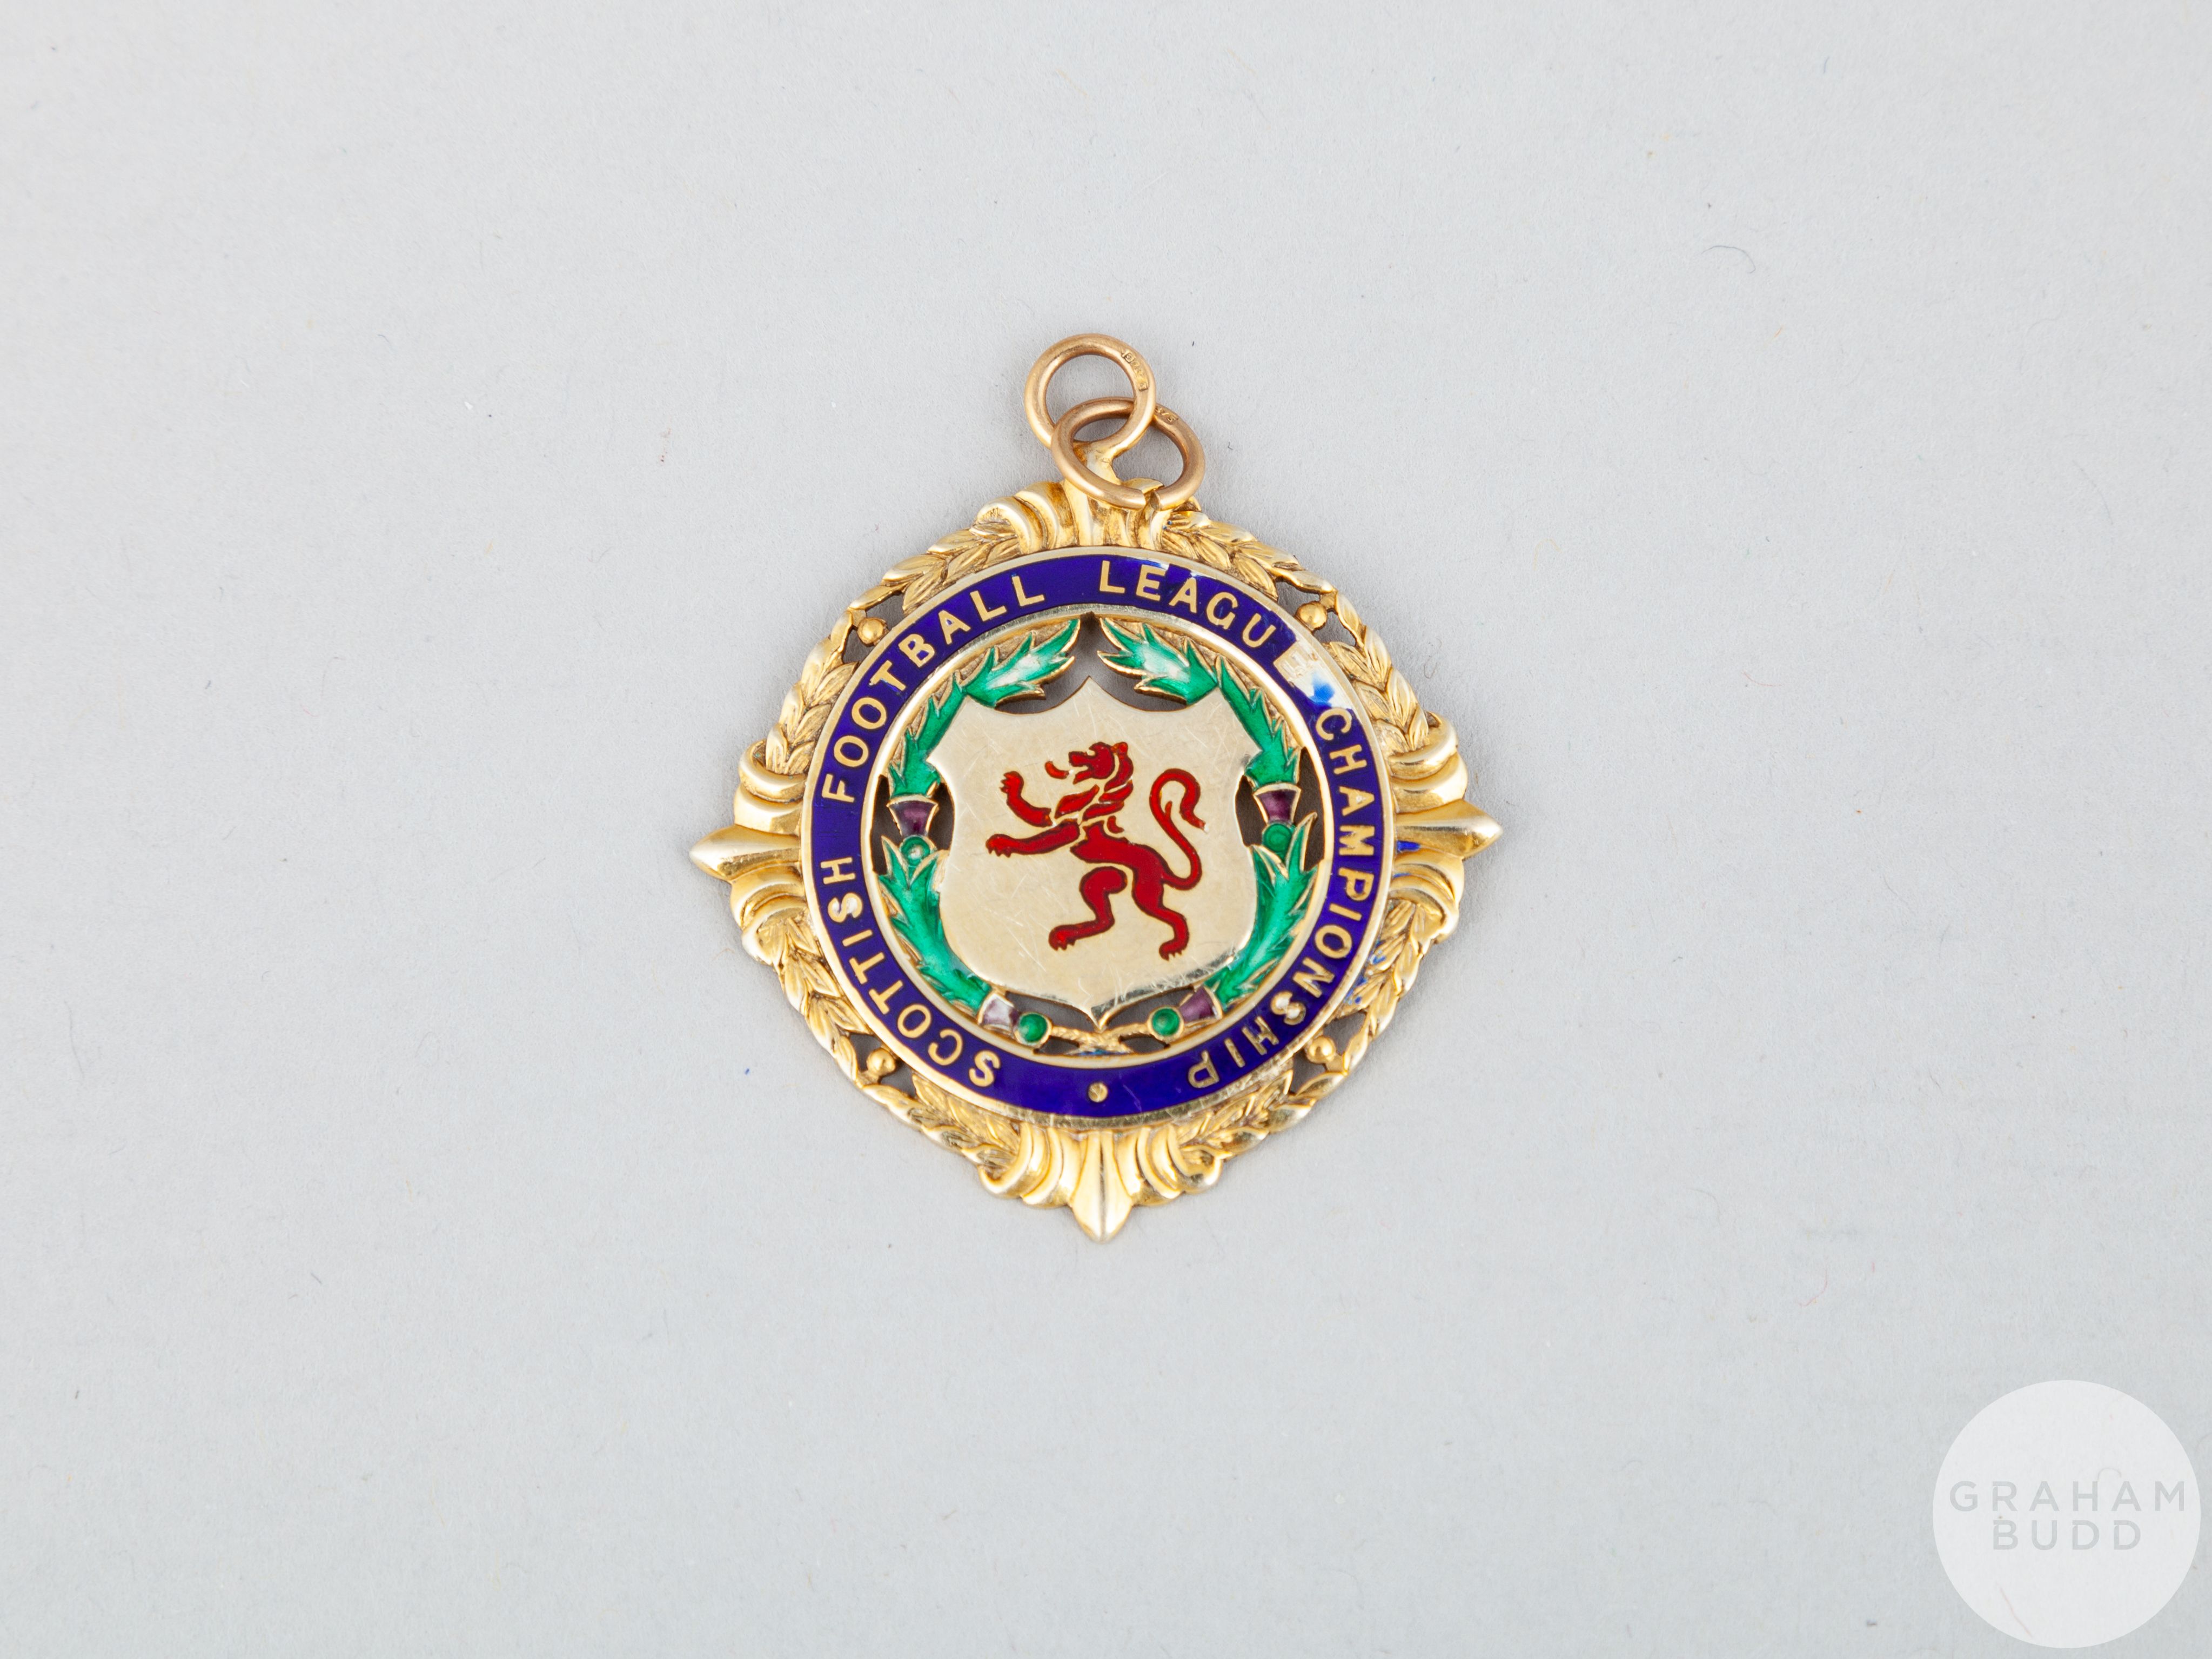 James Forrest Rangers F.C. League Champions and League Cup Winners medals, 1963-64